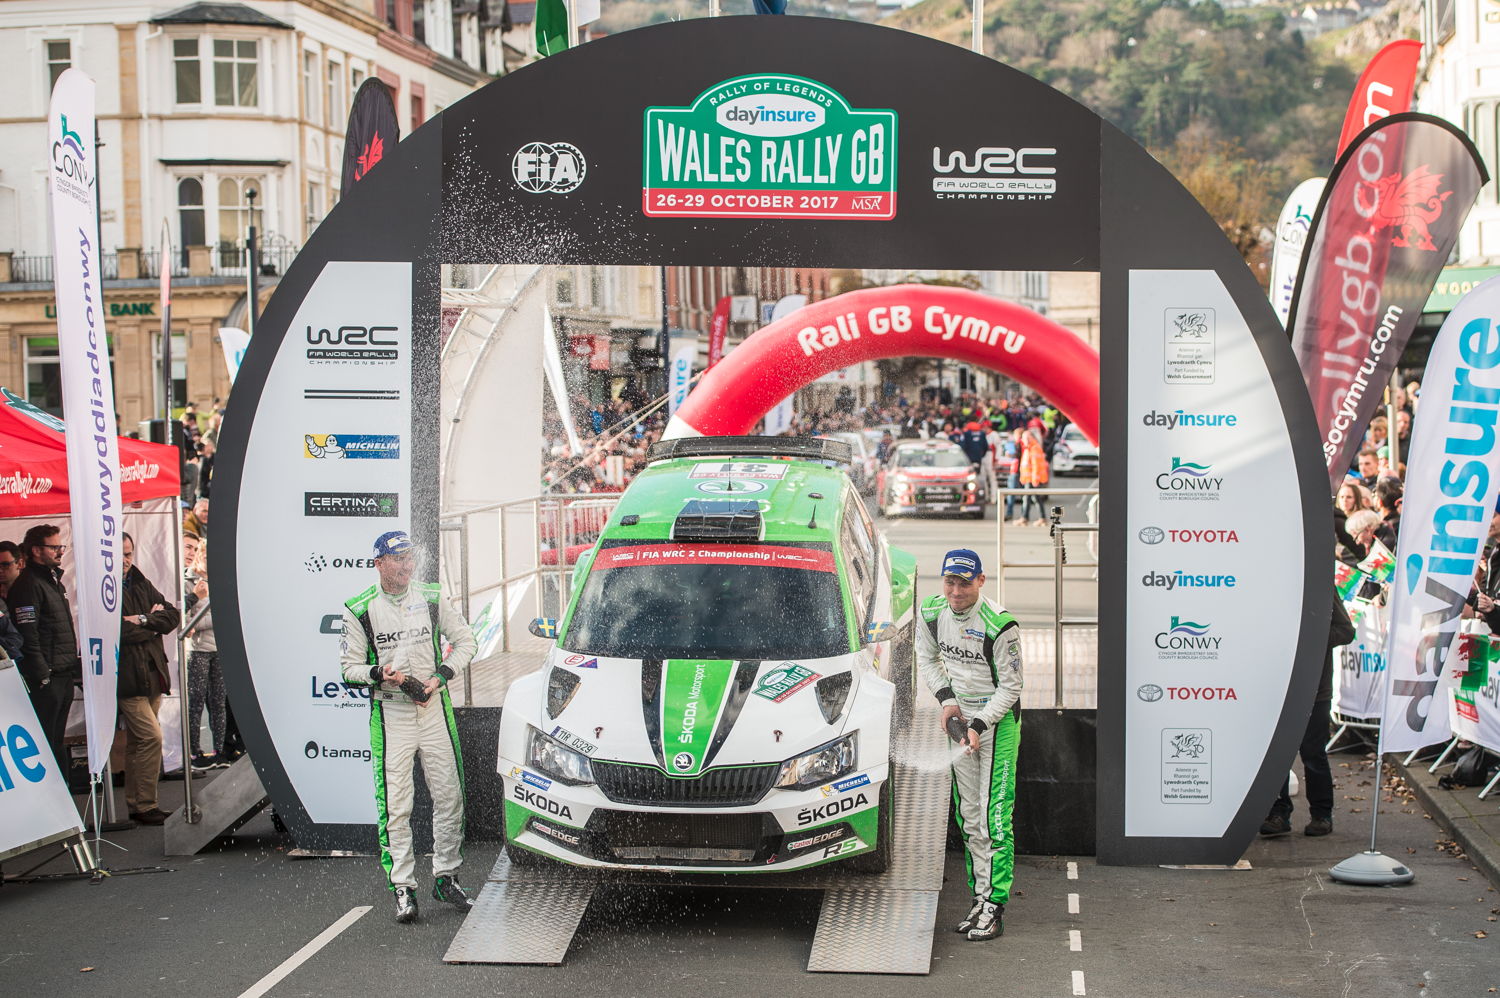 At Wales Rally GB newly crowned WRC 2 Champions Pontus Tidemand/Jonas Andersson, driving a ŠKODA FABIA R5, achieved their fifth win of the season